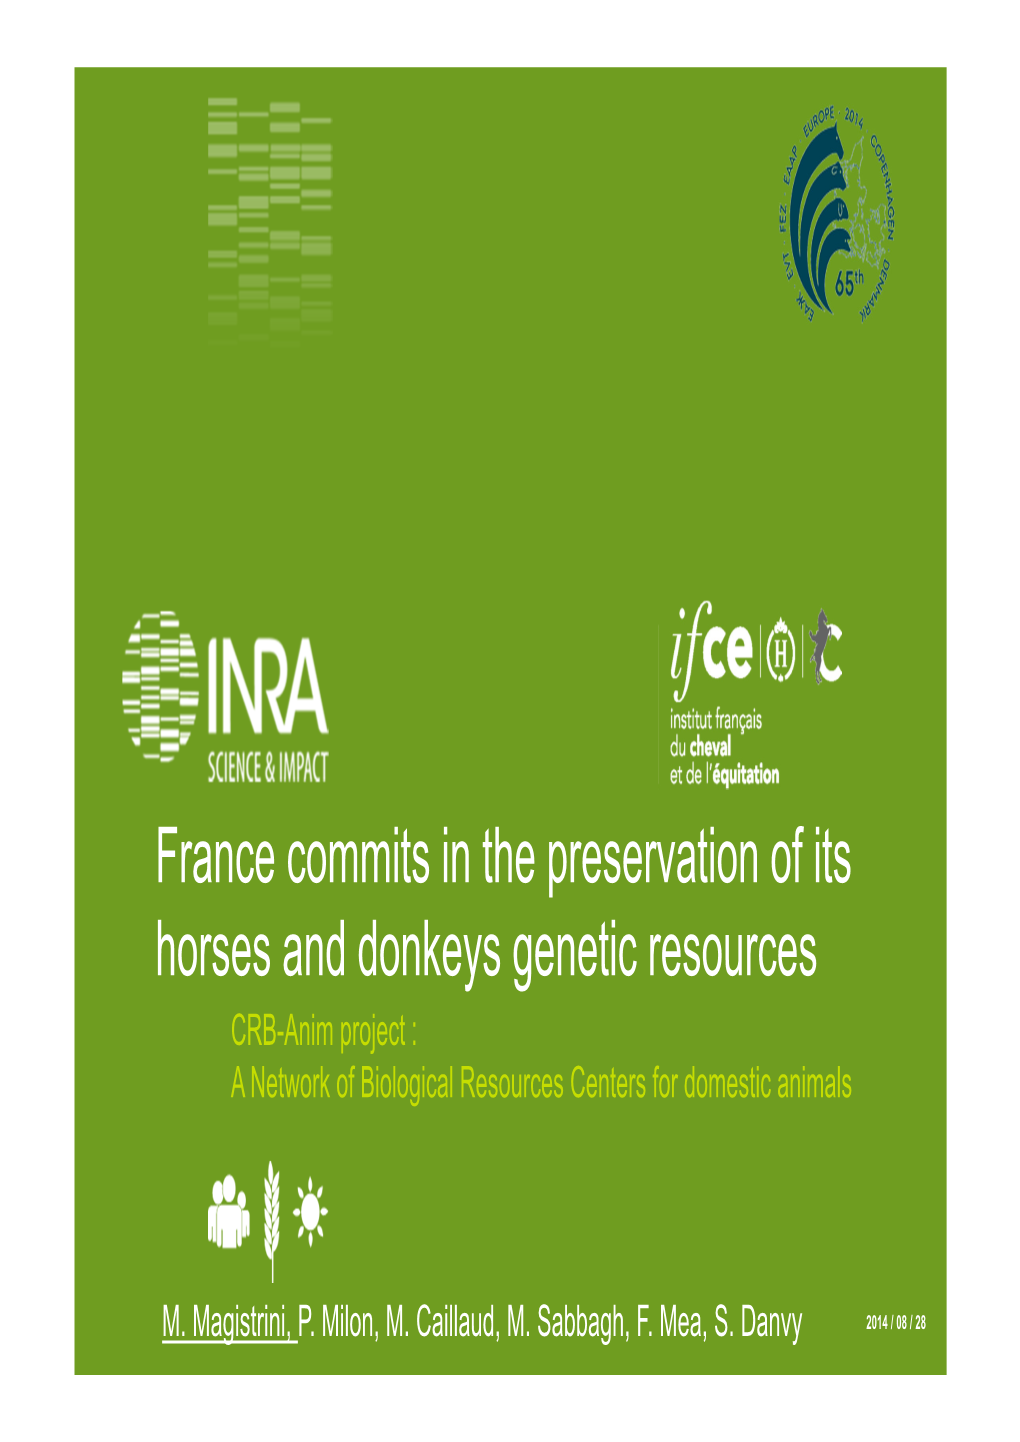 France Commits in the Preservation of Its Horses and Donkeys Genetic Resources CRB-Anim Project : a Network of Biological Resources Centers for Domestic Animals